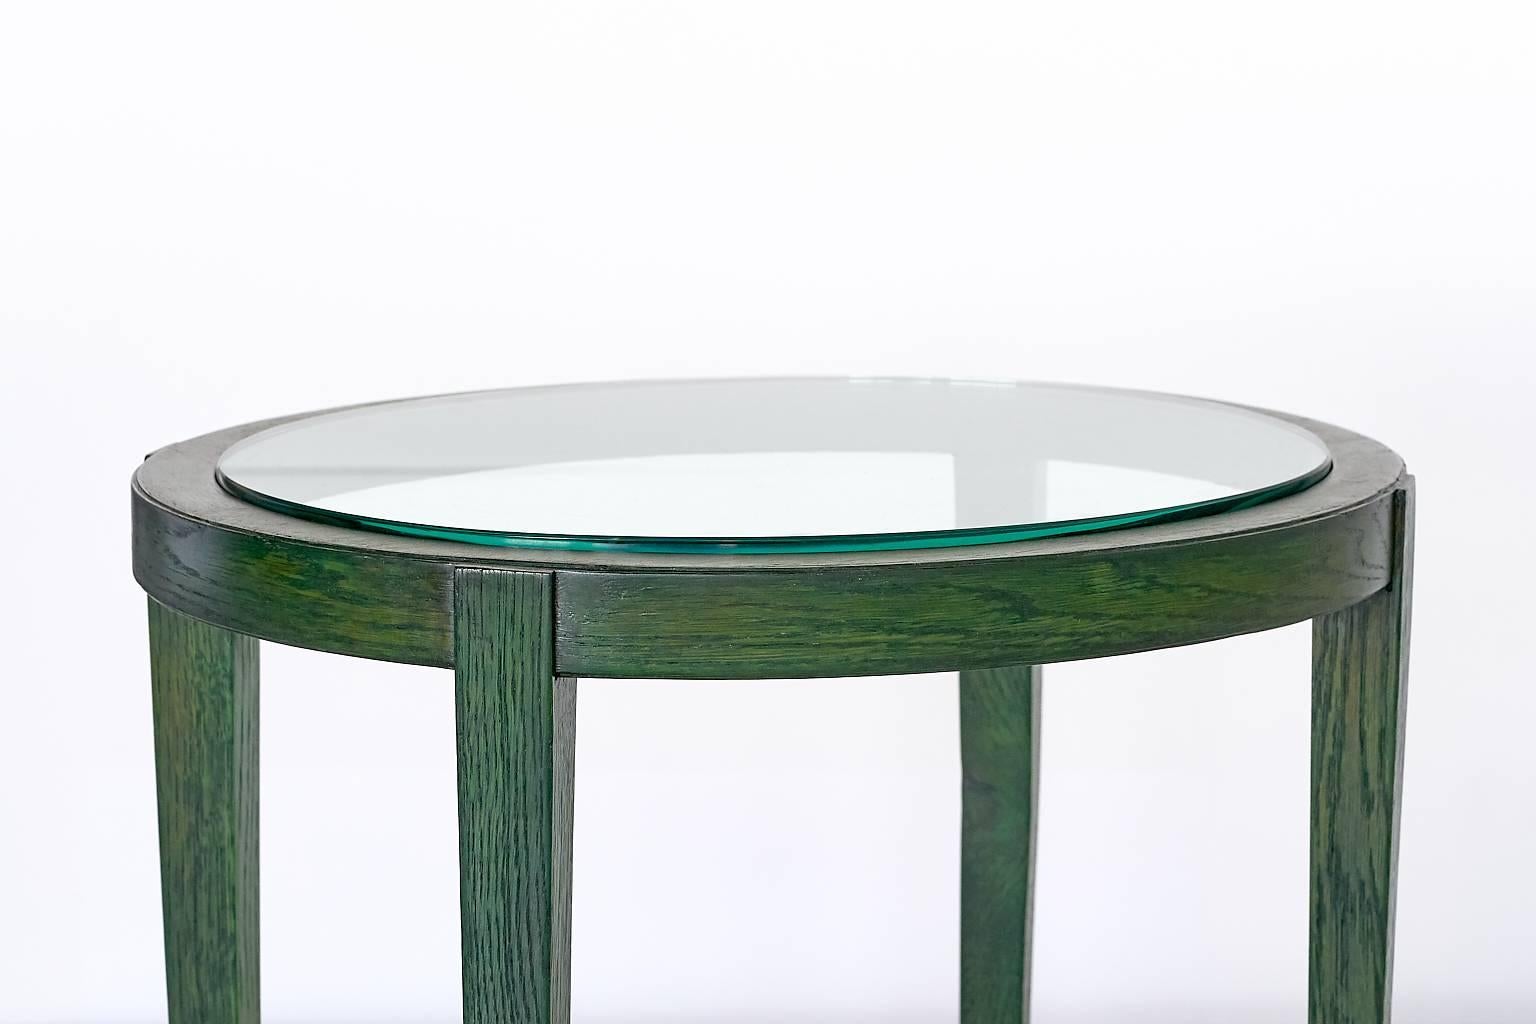 Pair of Green Italian Art Deco Side Tables Designed for a Florentine Residence 1